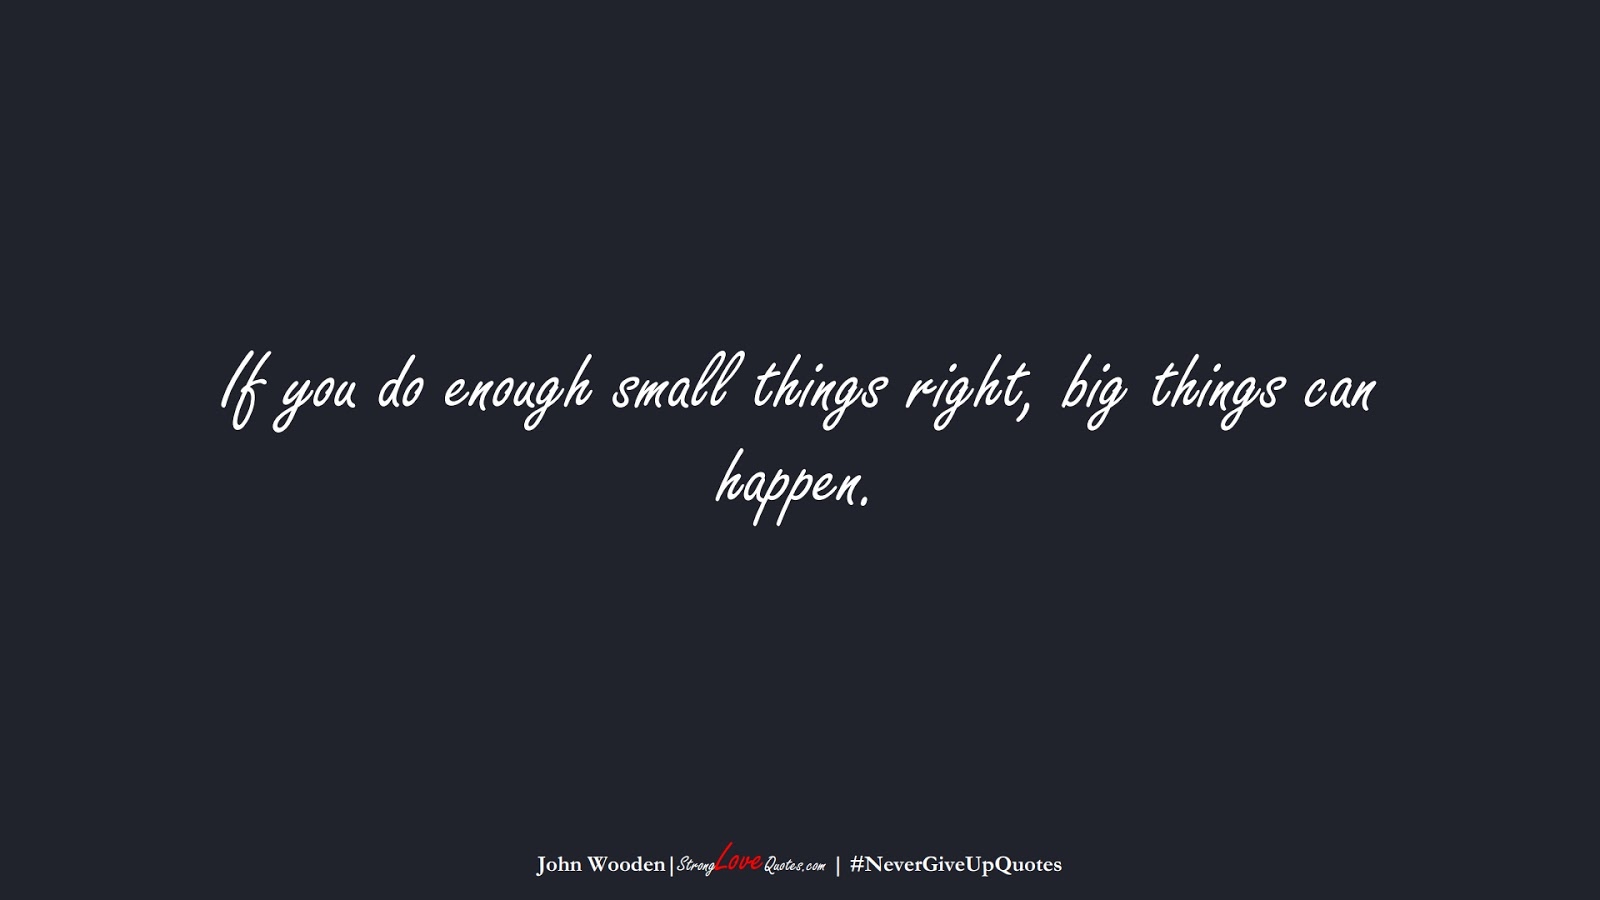 If you do enough small things right, big things can happen. (John Wooden);  #NeverGiveUpQuotes